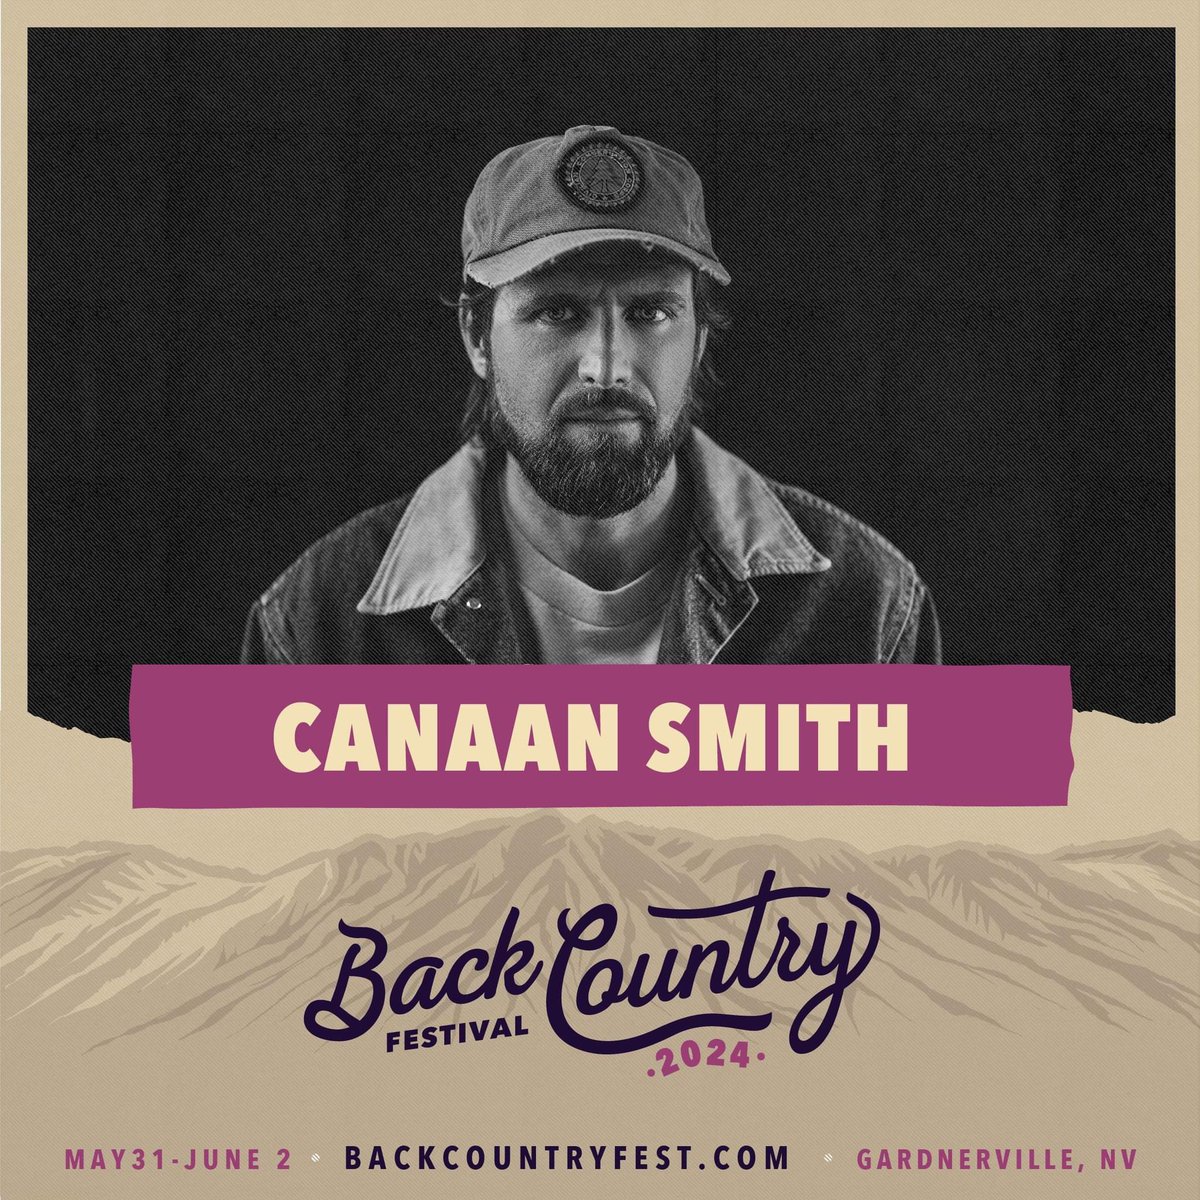 Not long until the BackCountry Festival! Get your tickets at canaansmith.com/tour